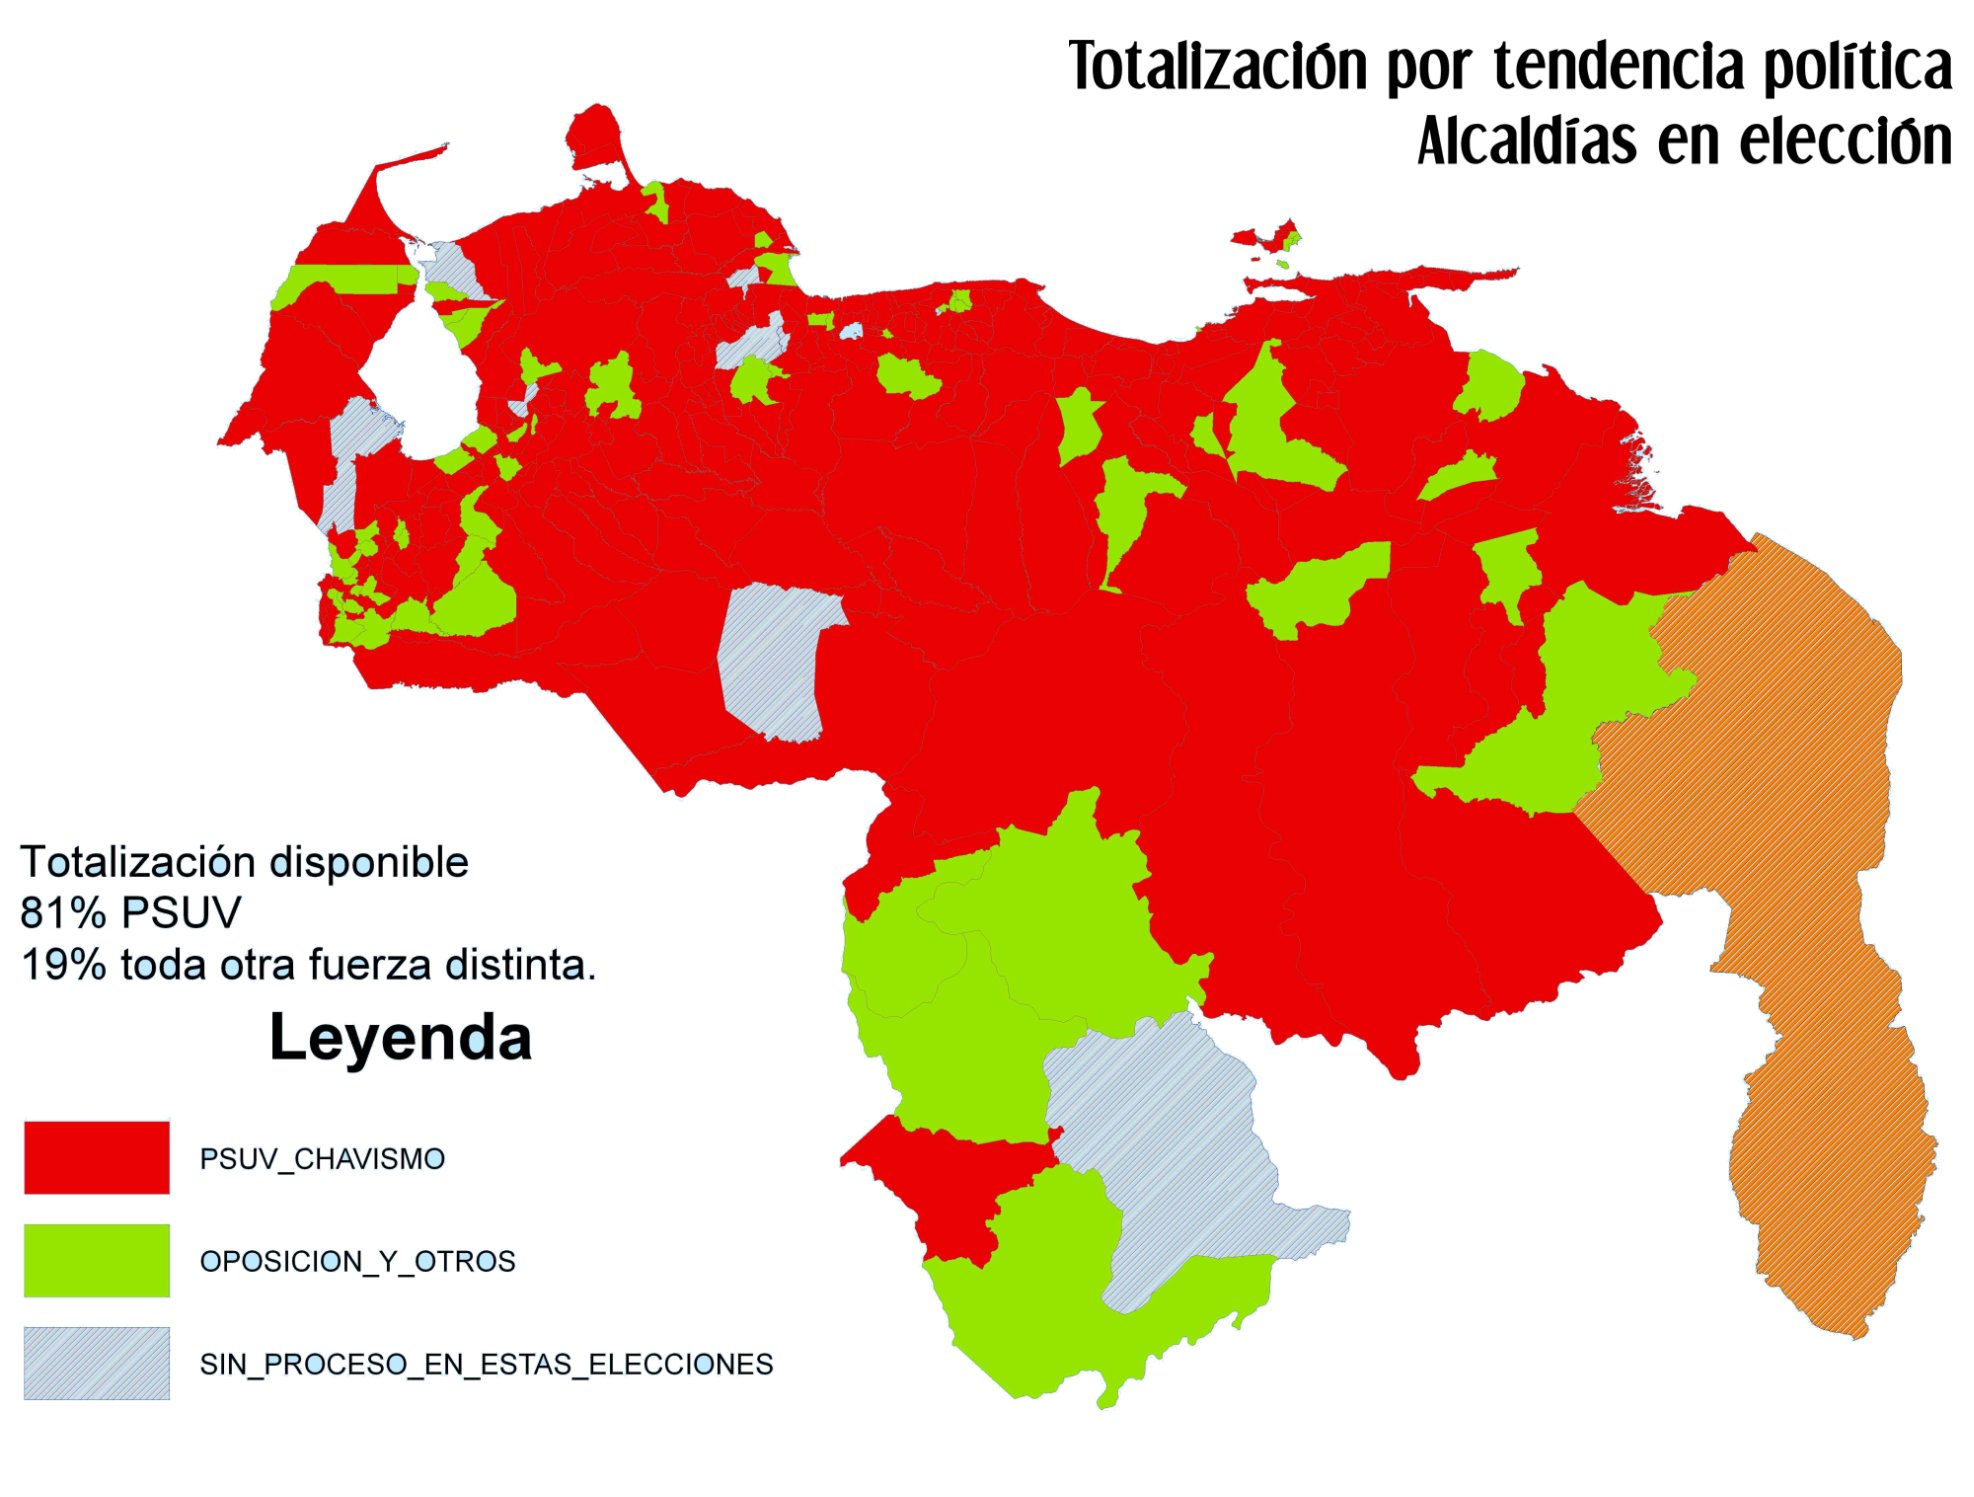 Map of councils: Red - PSUV win; Green - Oppositon win